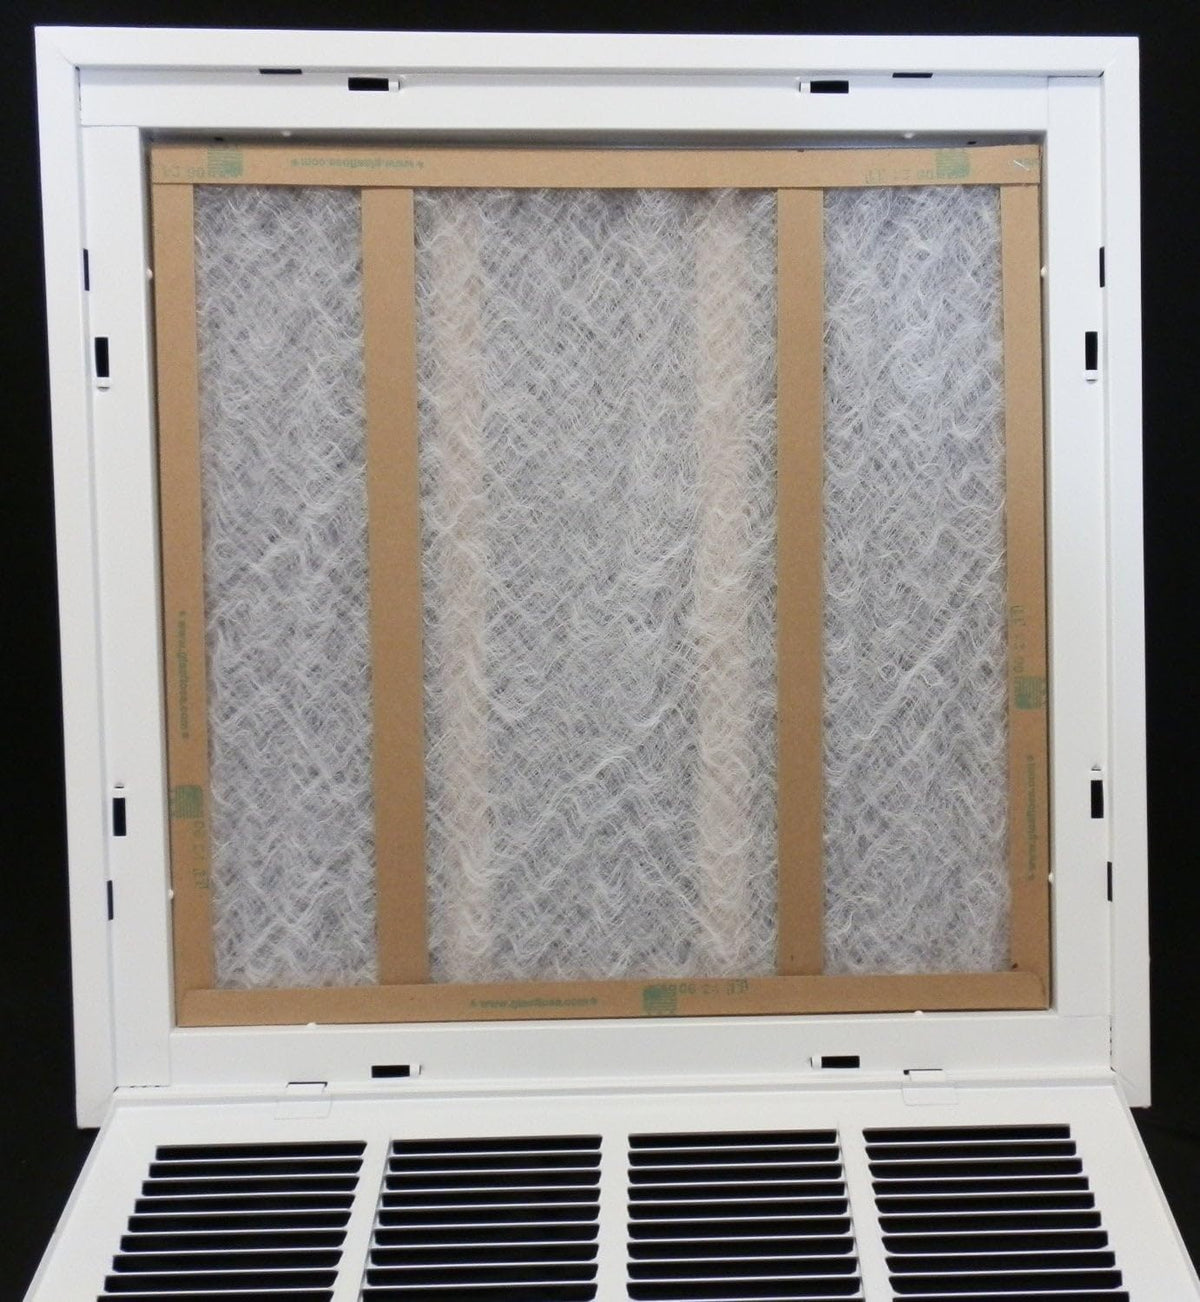 25&quot; X 14&quot; Steel Return Air Filter Grille for 1&quot; Filter - Fixed Hinged - [Outer Dimensions: 27 5/8&quot; X 16 5/8&quot;]